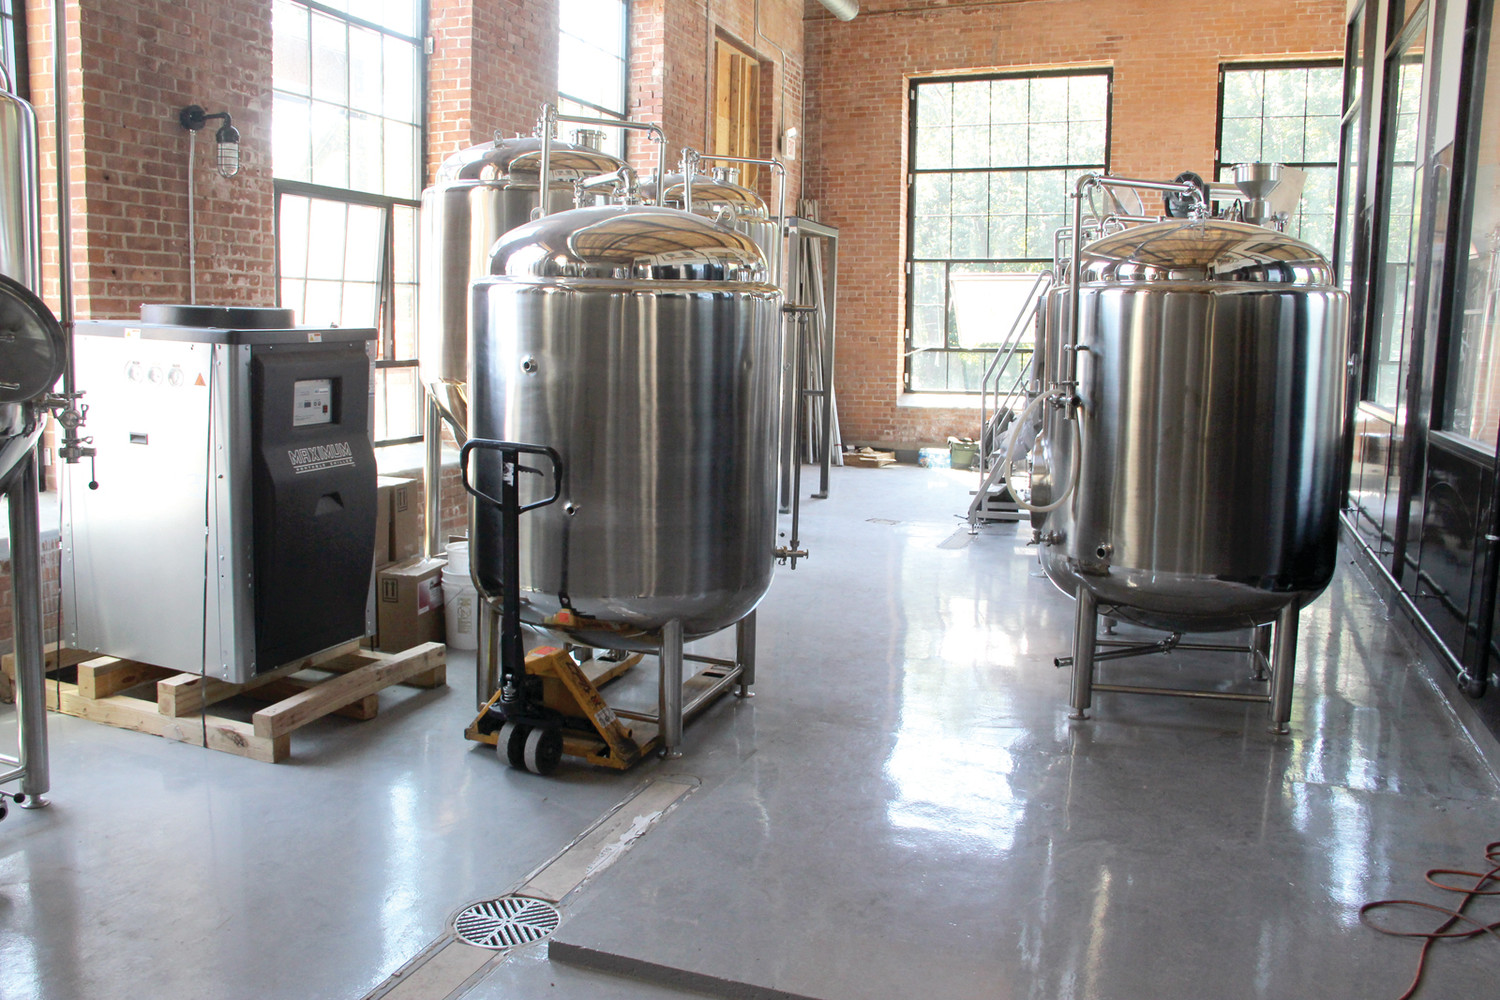 SOMETHING’S BREWIN’: Apponaug Brewing Company is raring to go, with their first brewing location already set up in a commercial space at the Mills. These fermentation tanks here can produce 310 gallons of beer. They hope to open before Labor Day.